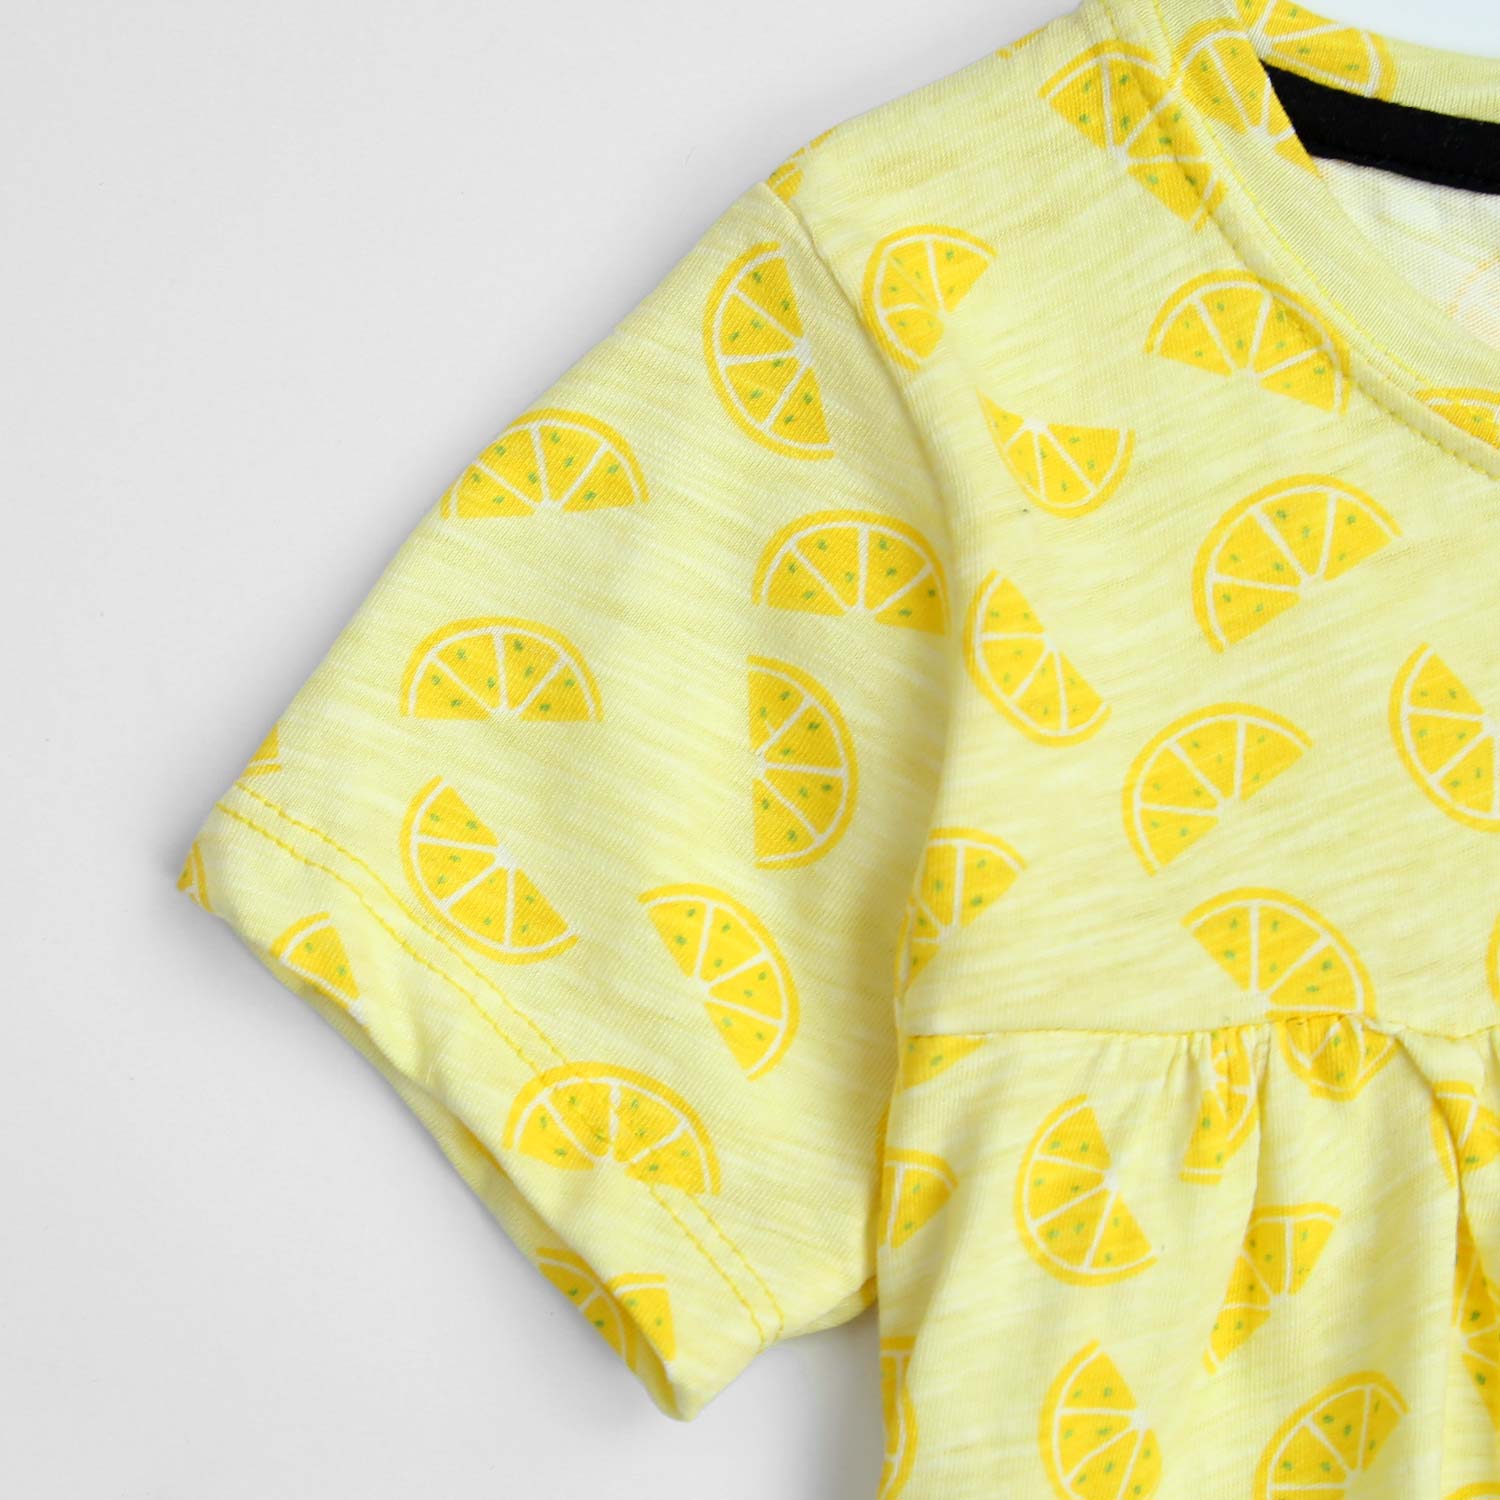 Girls Pure Cotton "Allover Printed"Yellow T-shirt Frock